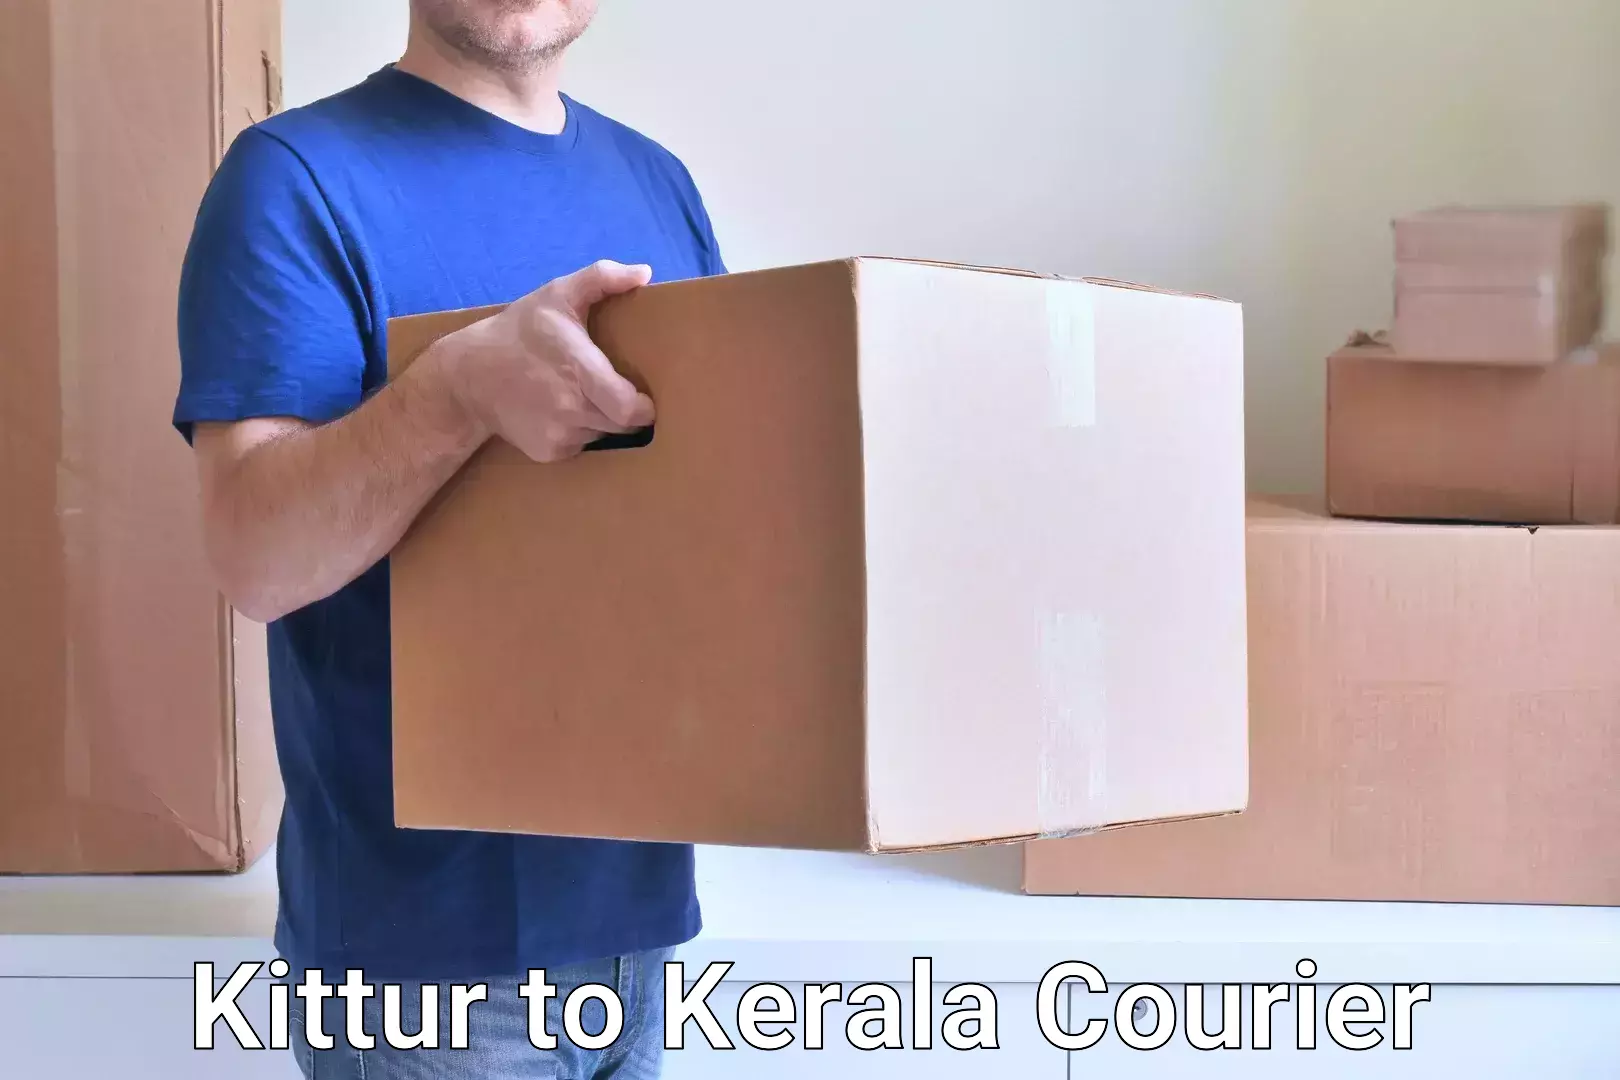 Same-day delivery solutions Kittur to Koyilandy